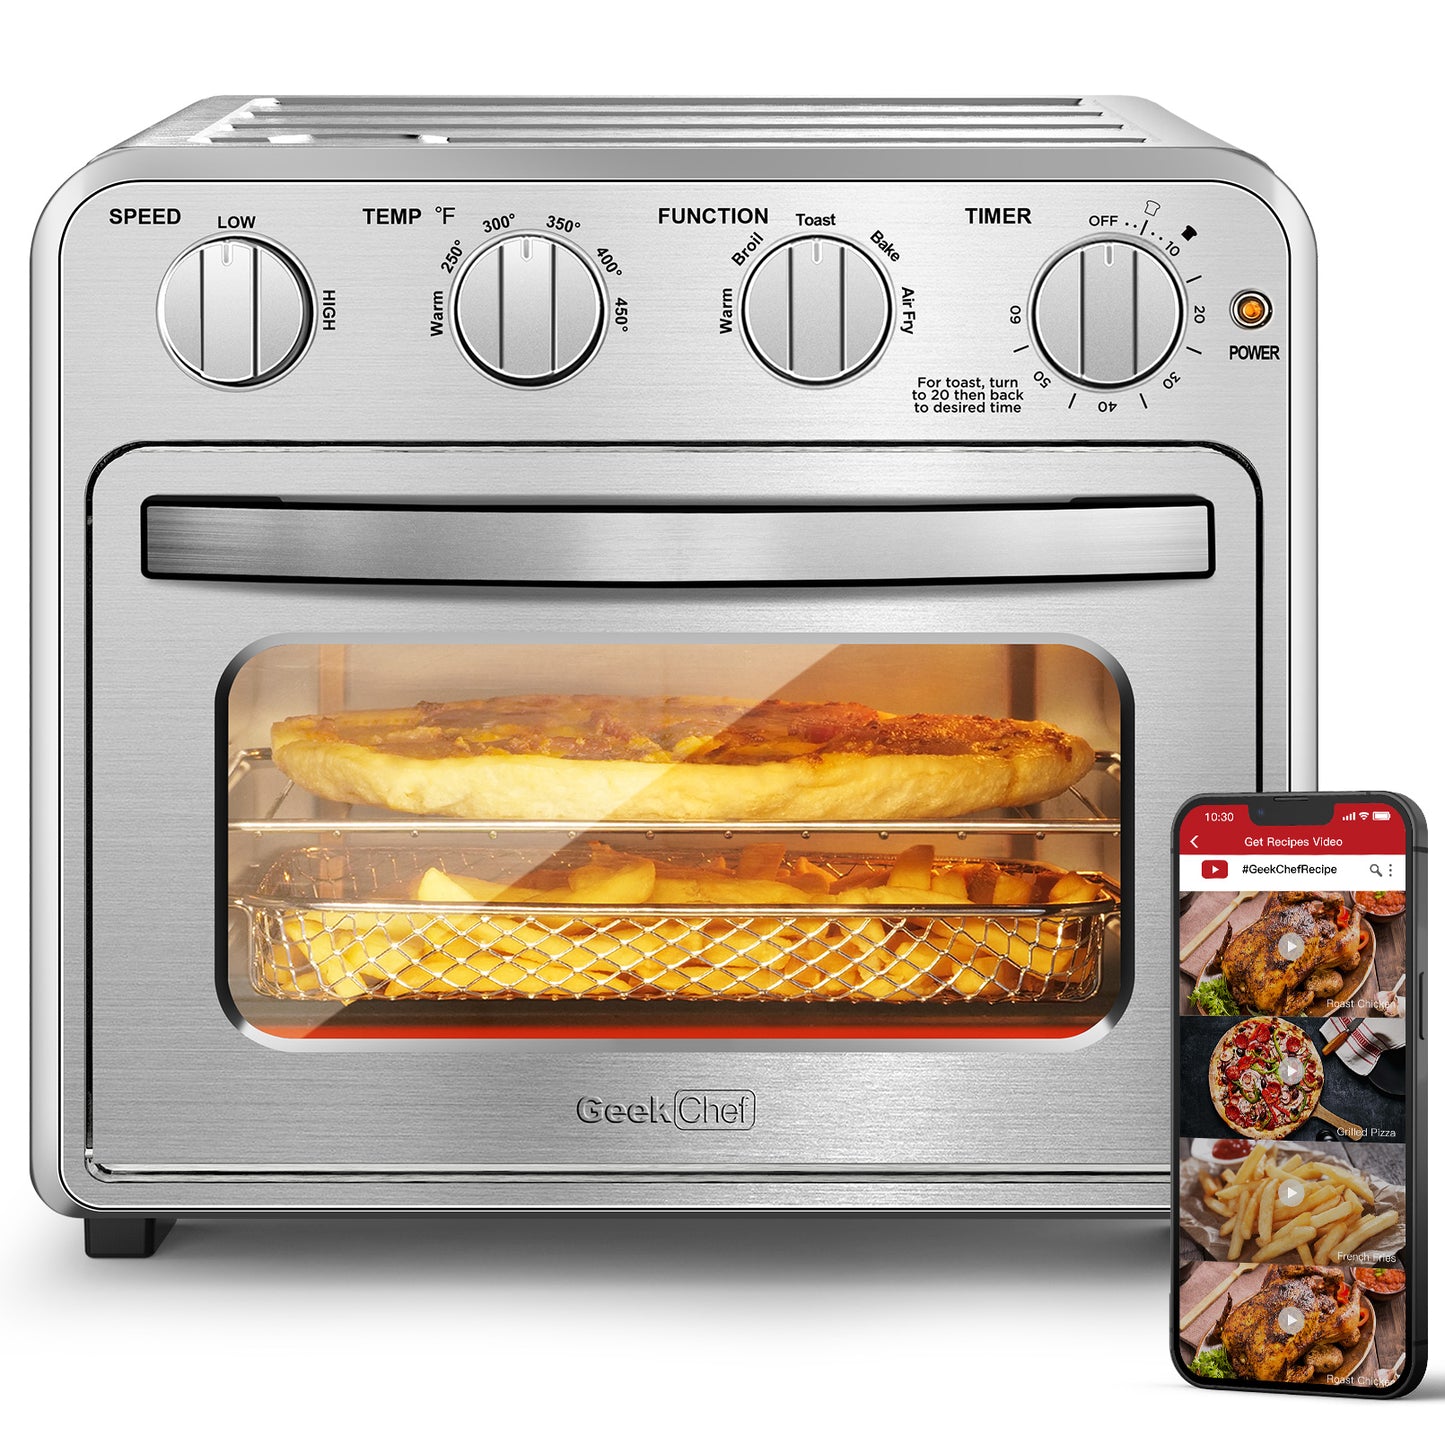 Geek Chef Air Fryer Toaster Oven Combo, 4 Slice Toaster Convection Air Fryer Oven Warm, Broil, Toast, Bake, Air Fry, Oil-Free, Accessories Included, Stainless Steel, Silver(16QT Air Fryer Oven)